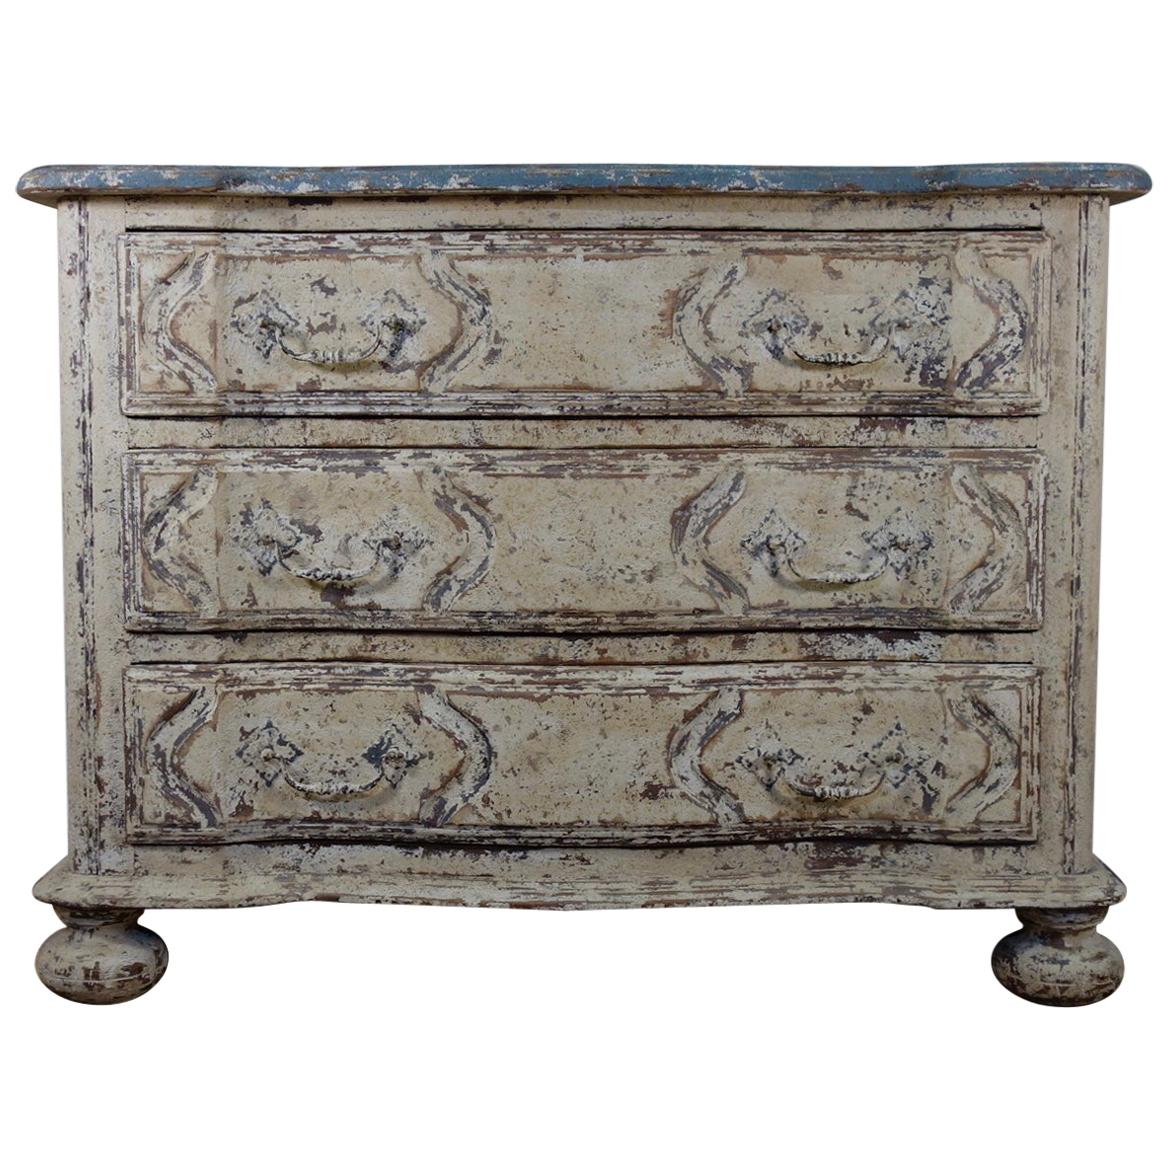 Original Painted French Serpentine Commode, Chest of Drawers